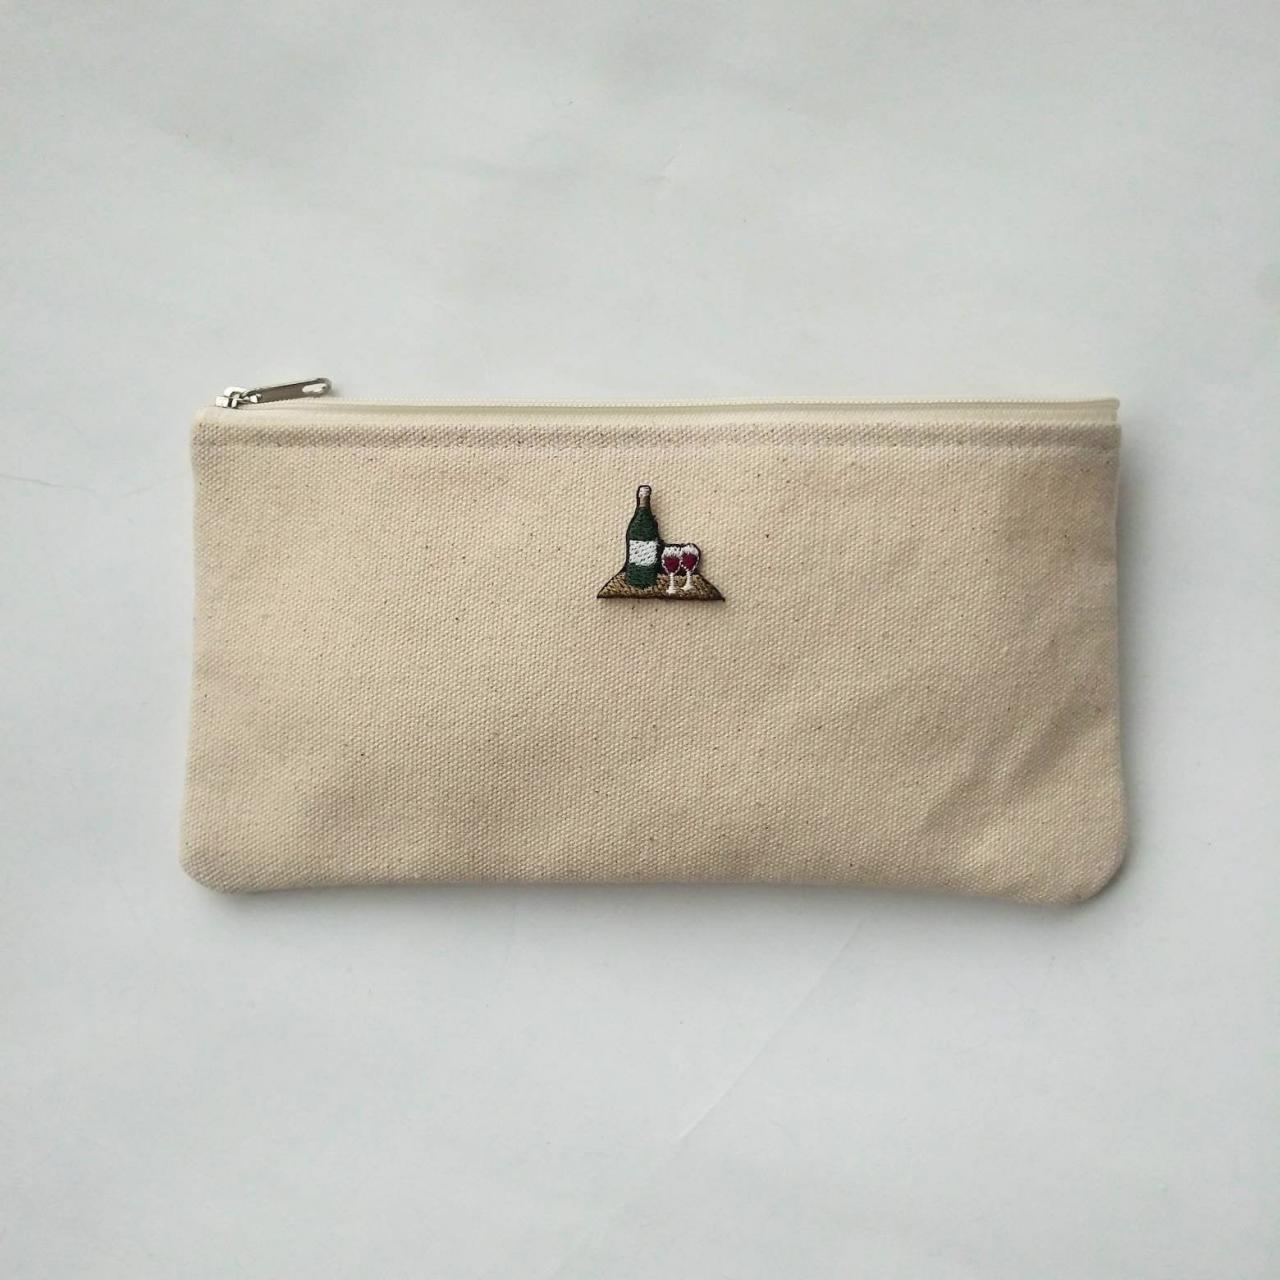 Cozy Afternoon Drinking Zipper Pouch, Cotton Pouch, Make-up Pouch, Pencils Pouch